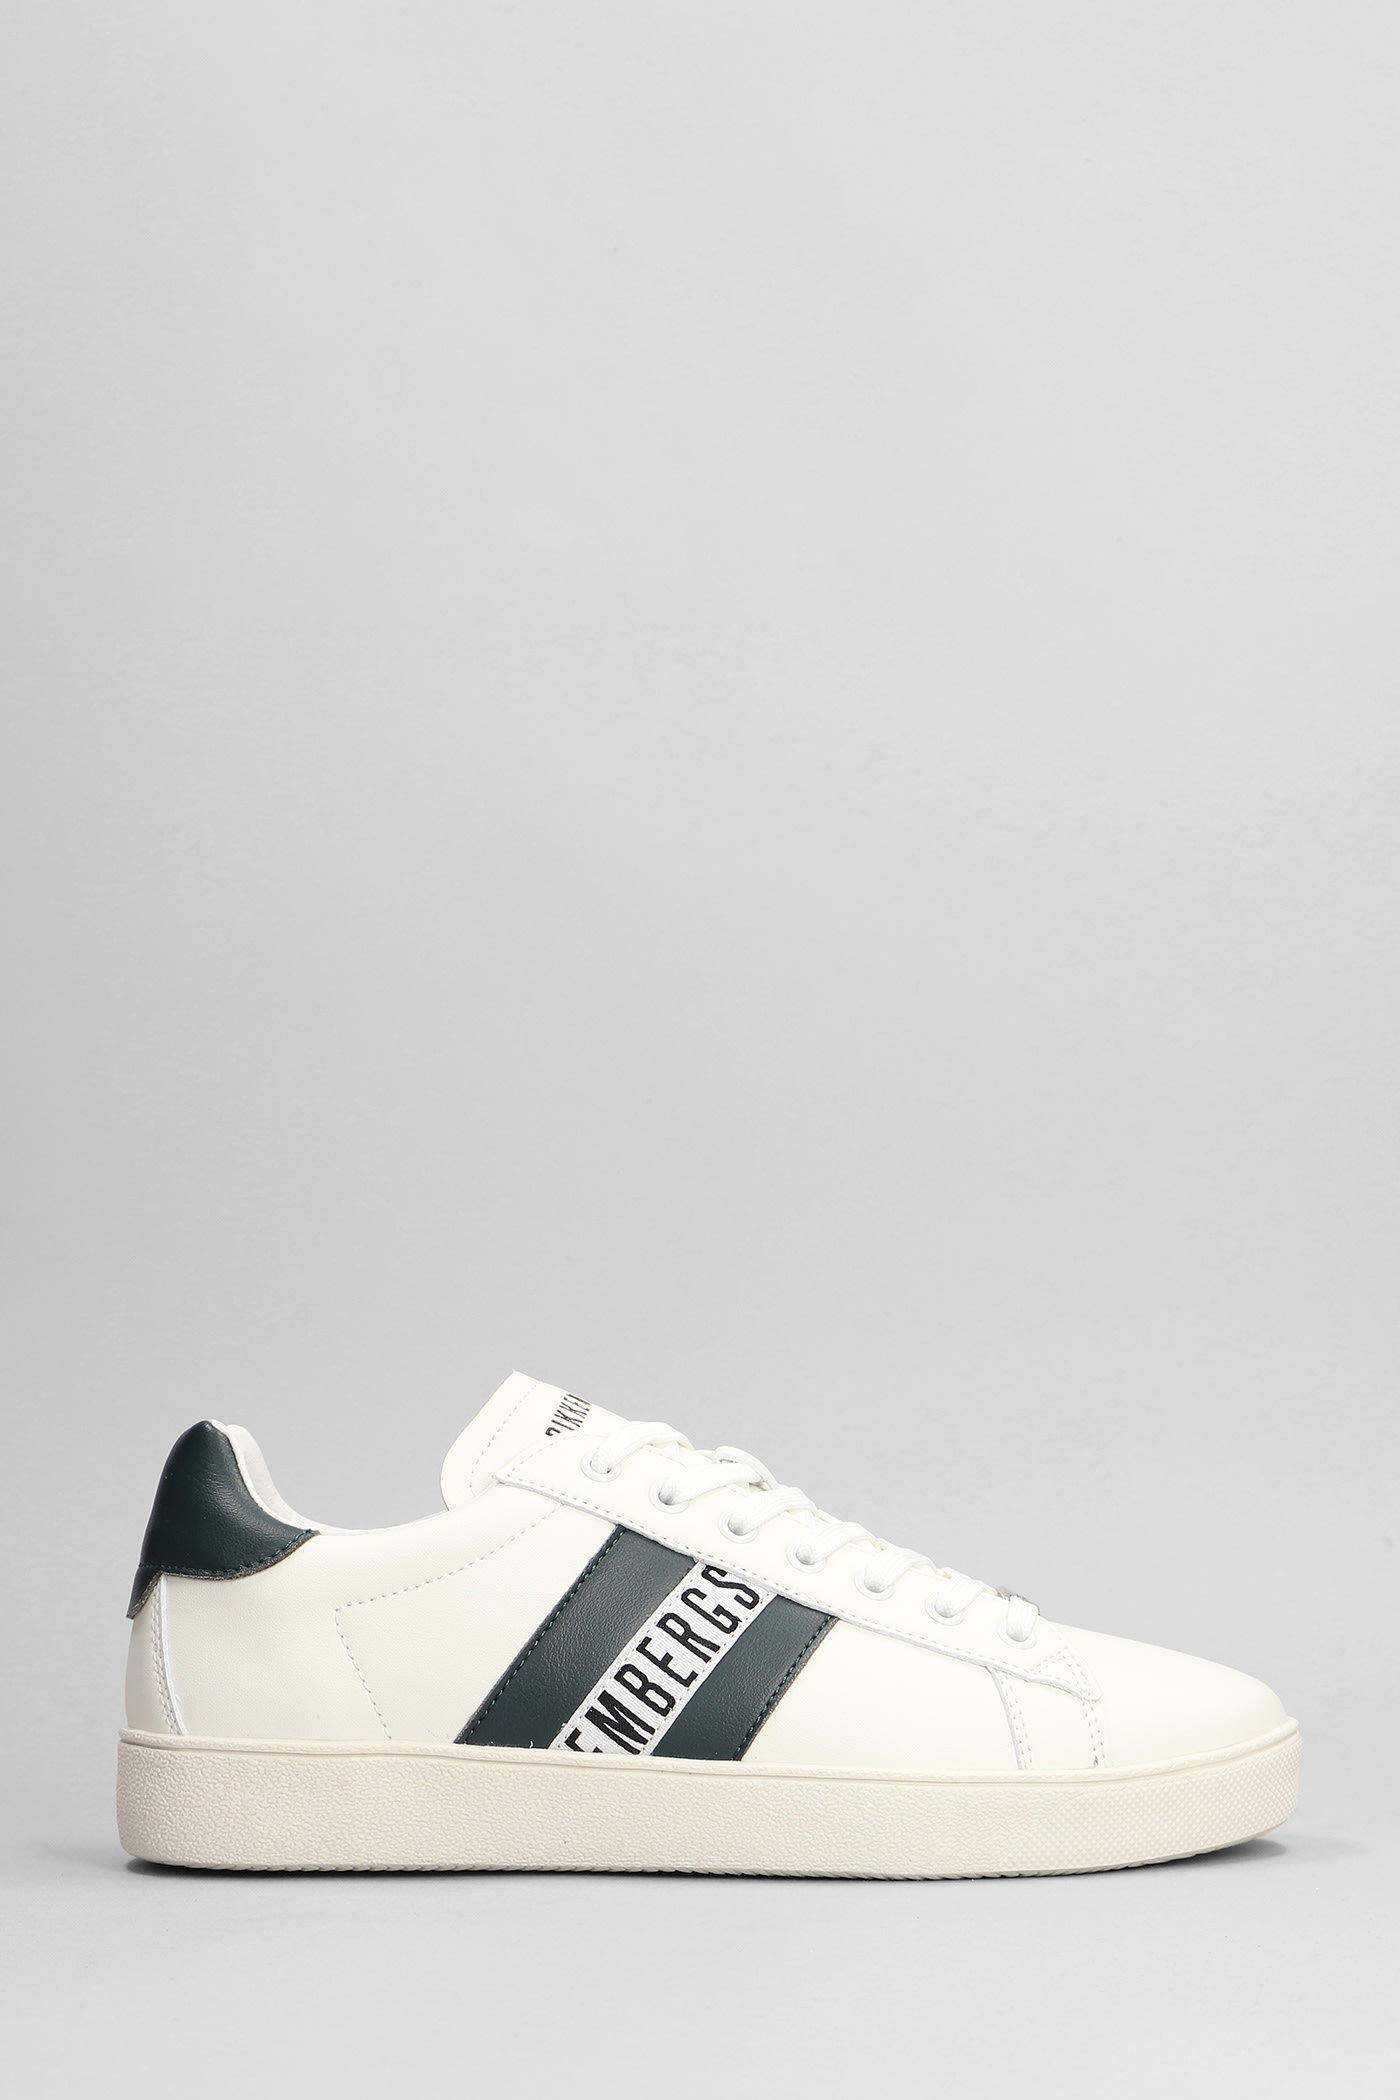 BIKKEMBERGS SNEAKERS IN WHITE LEATHER